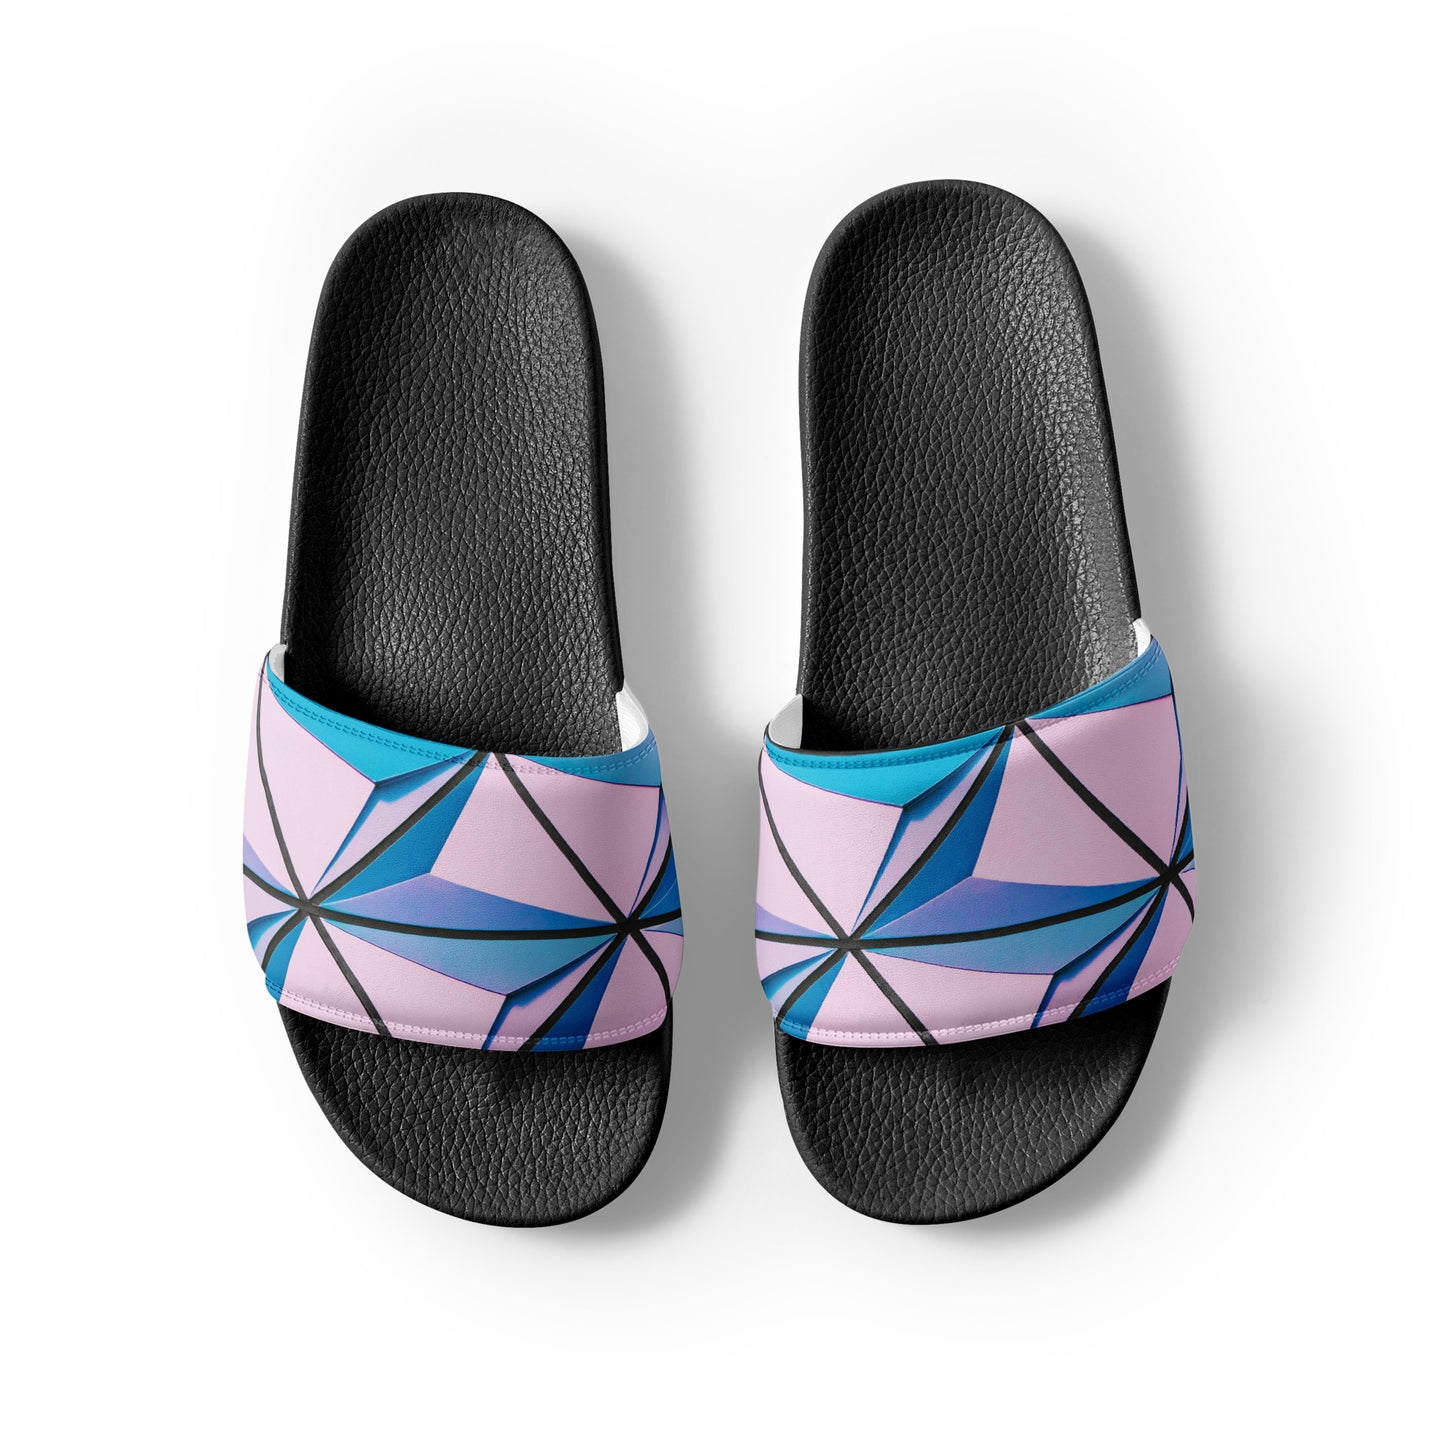 Linage Of Angles Women's slides